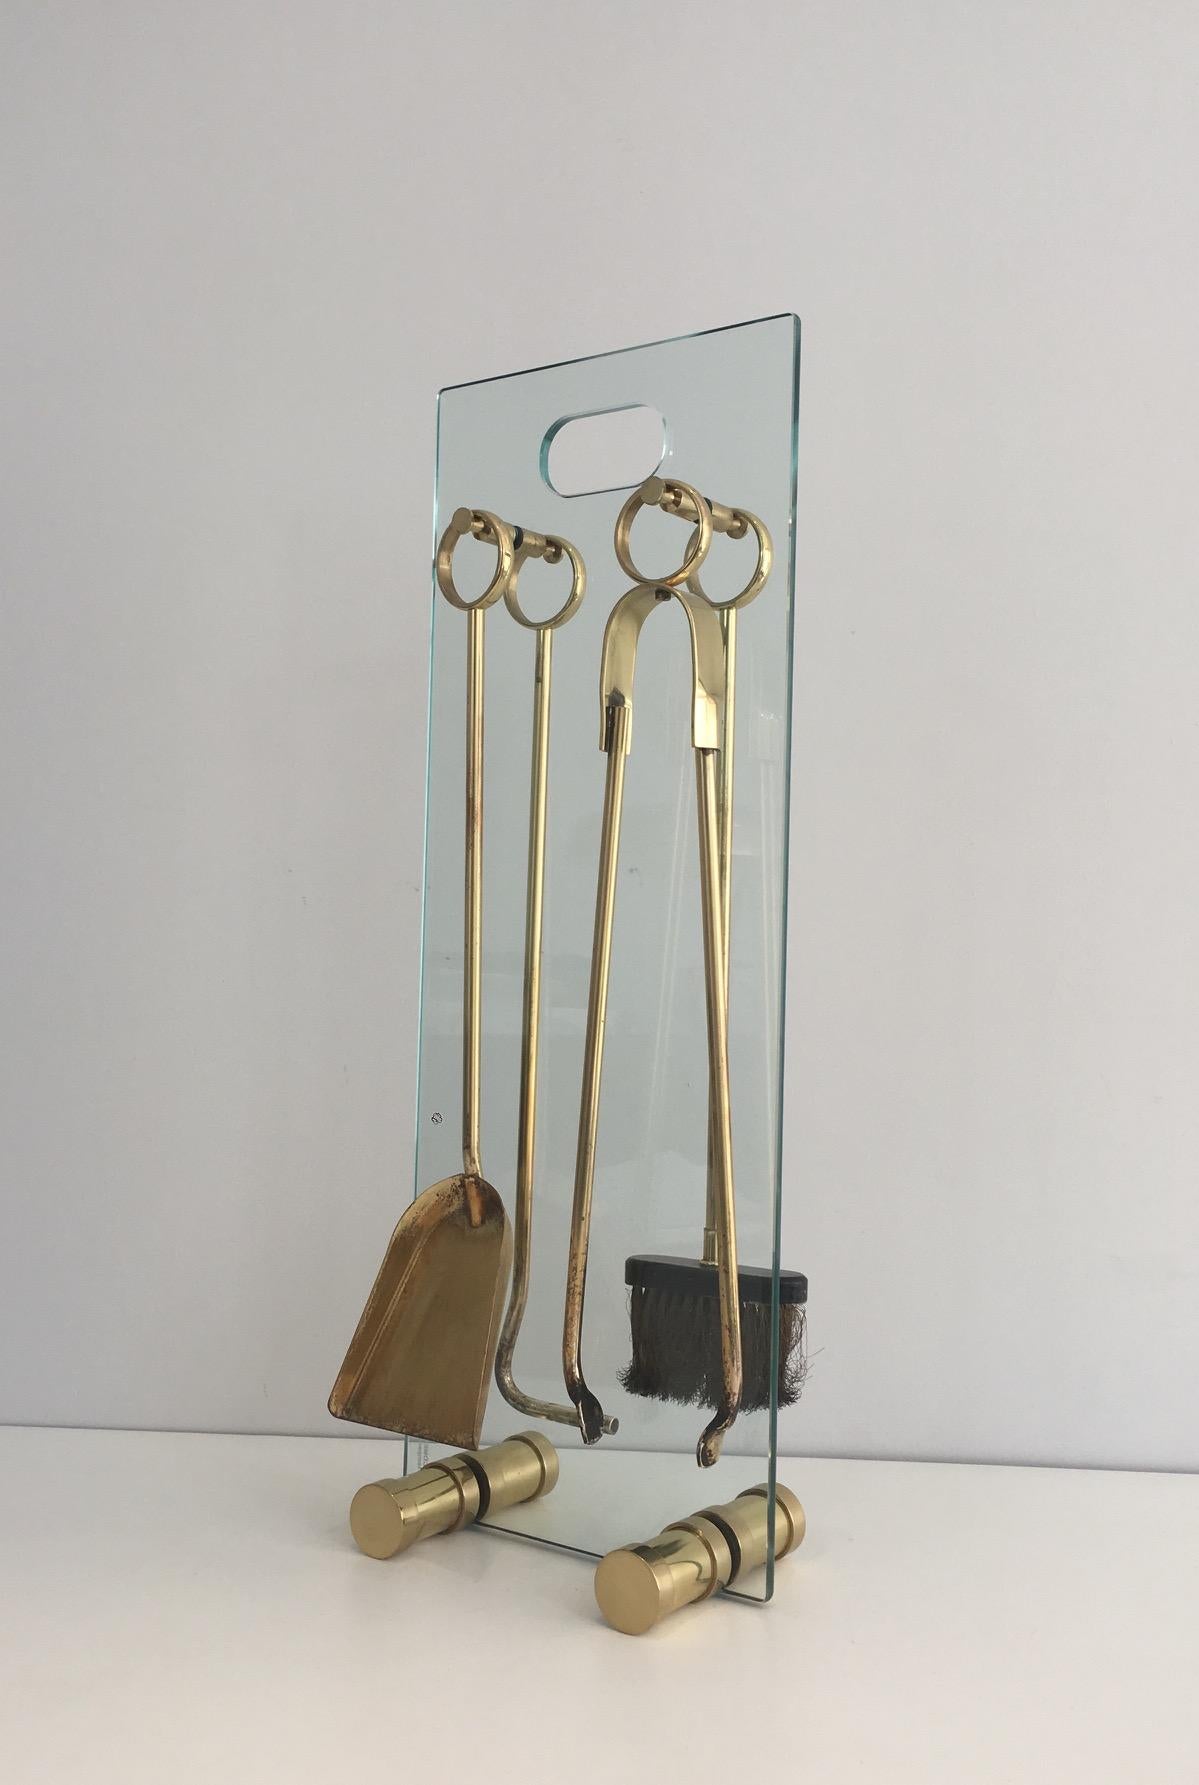 This nice fire place tools are made of brass and are displayed on a tempered glass and brass base. This is a French work, circa 1970.